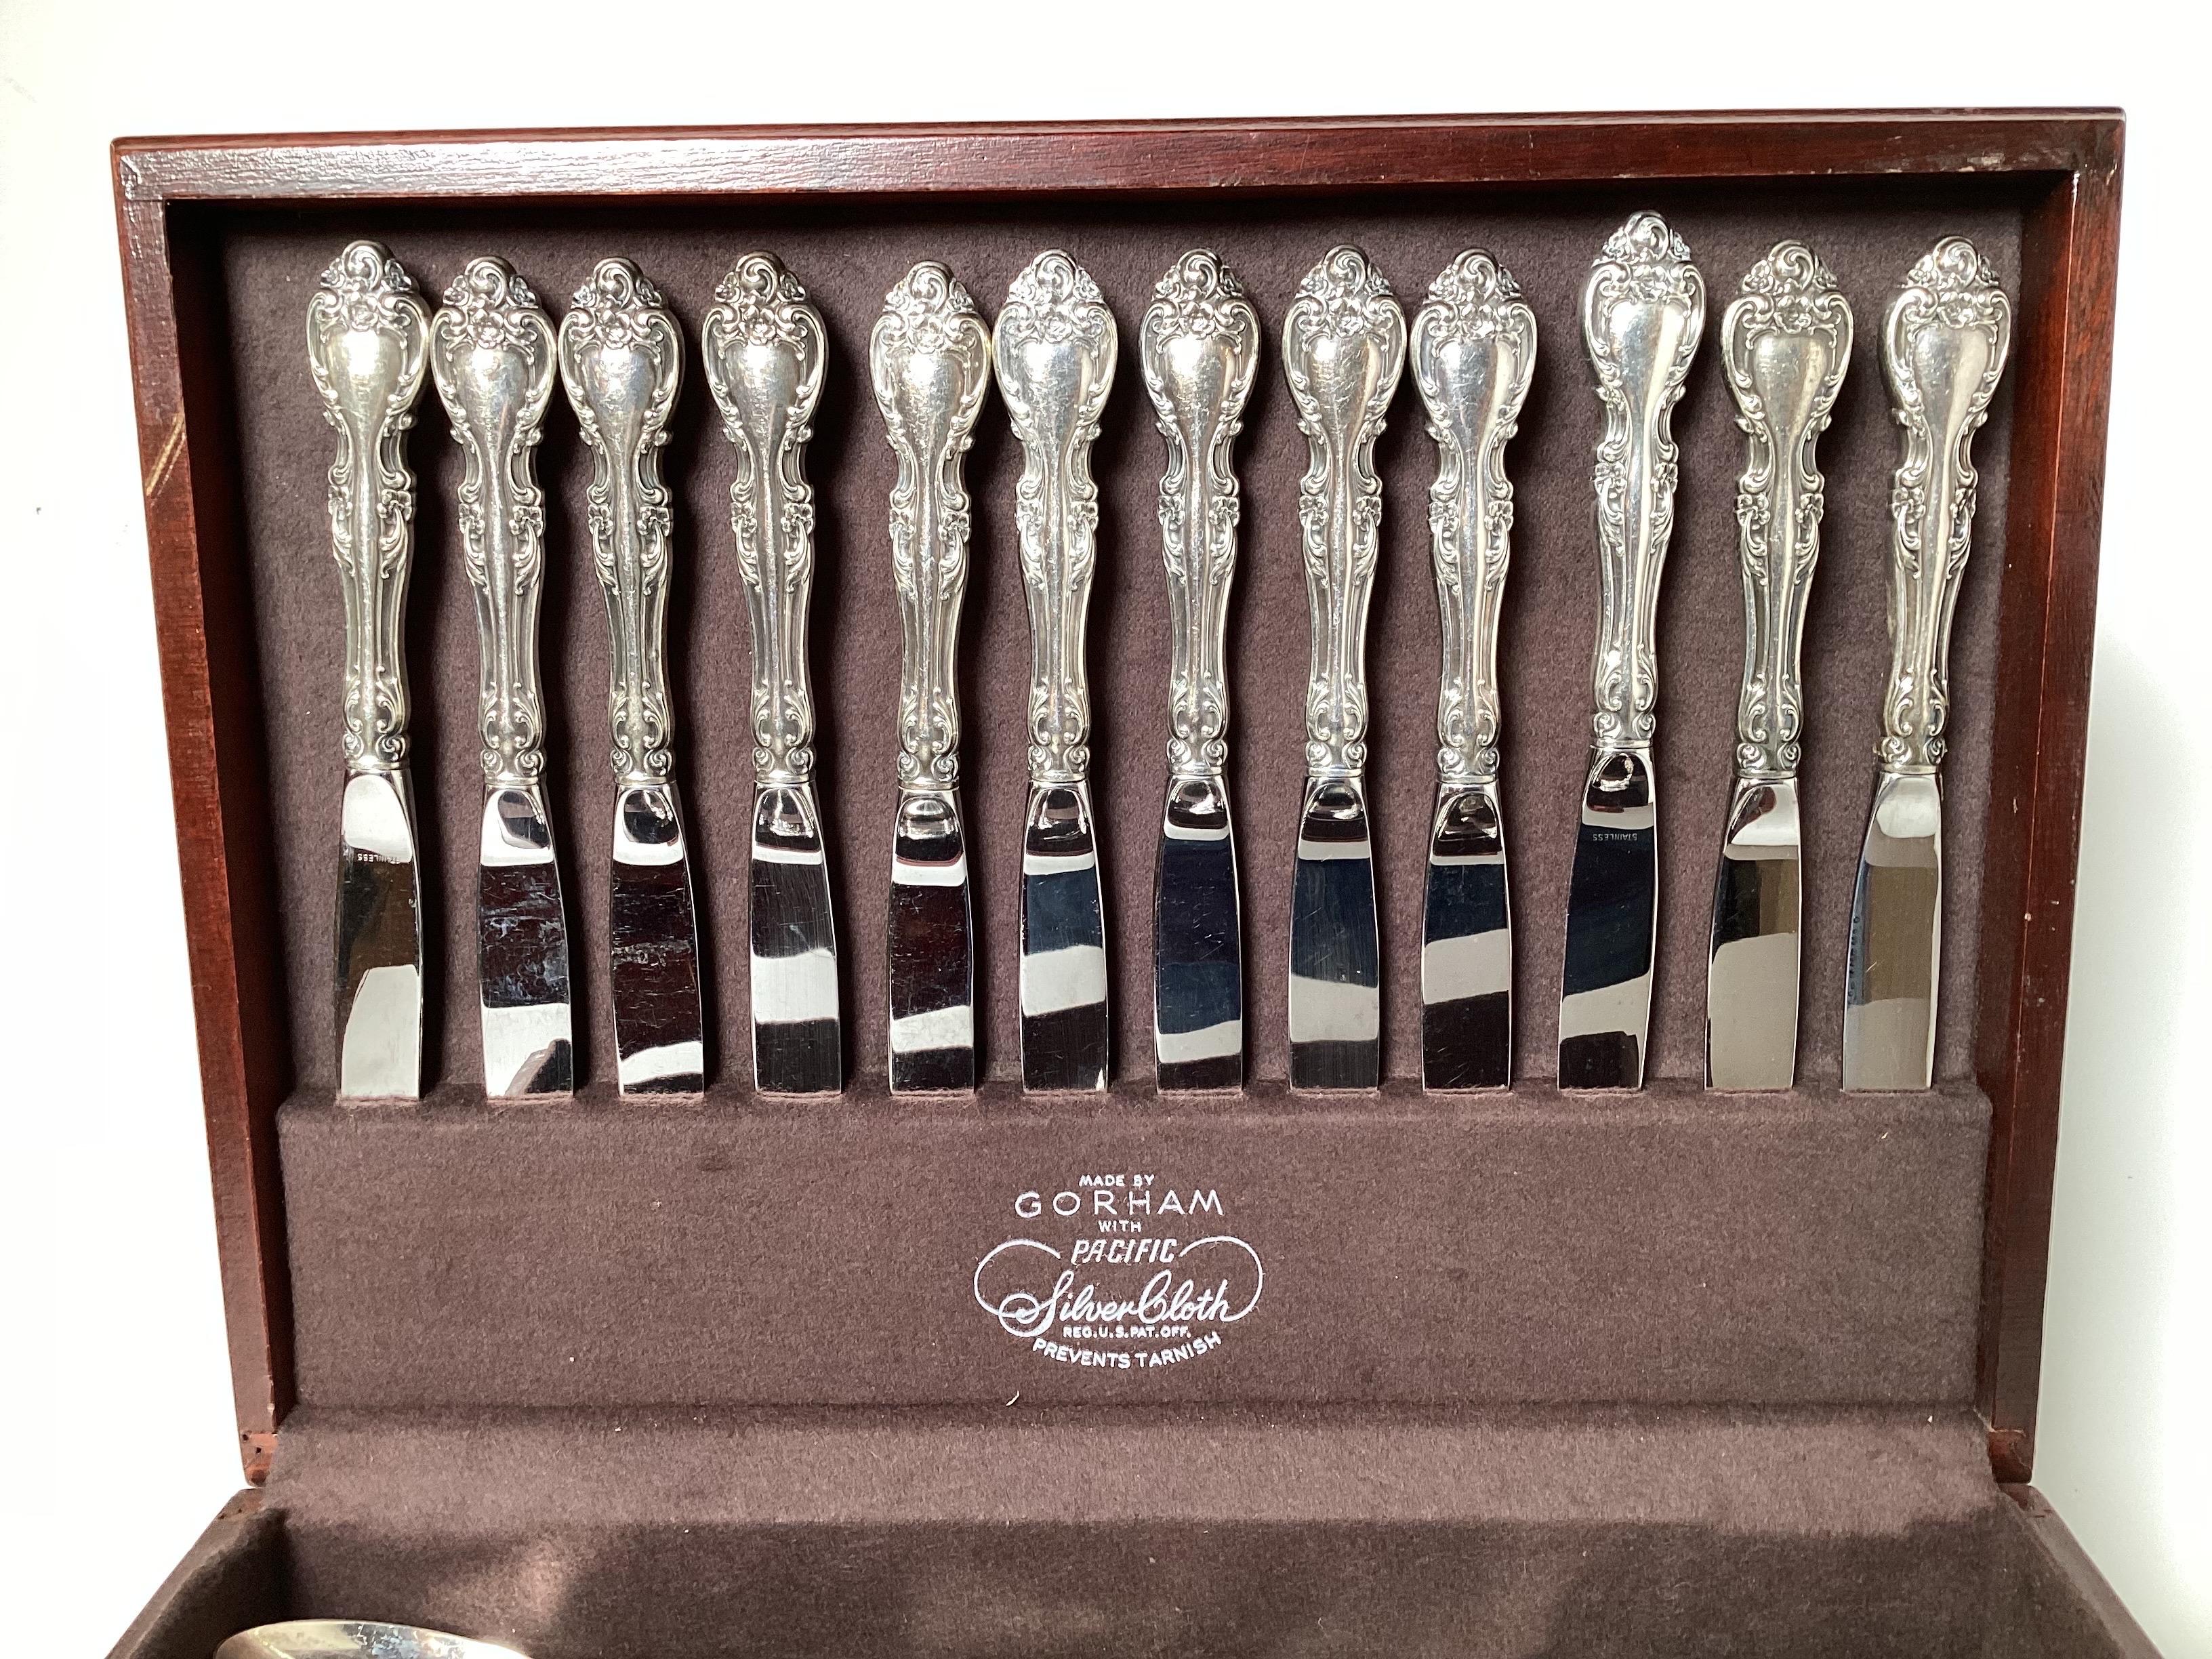 A sterling silver flatware service for 12 plus 16 serving pieces. Made by Gorham pattern, Melrose. The set consists of 12 each, dinner forks, dinner knives, salad fork, soup spoon and double teaspoons (24) along with 16 serving pieces. A total of